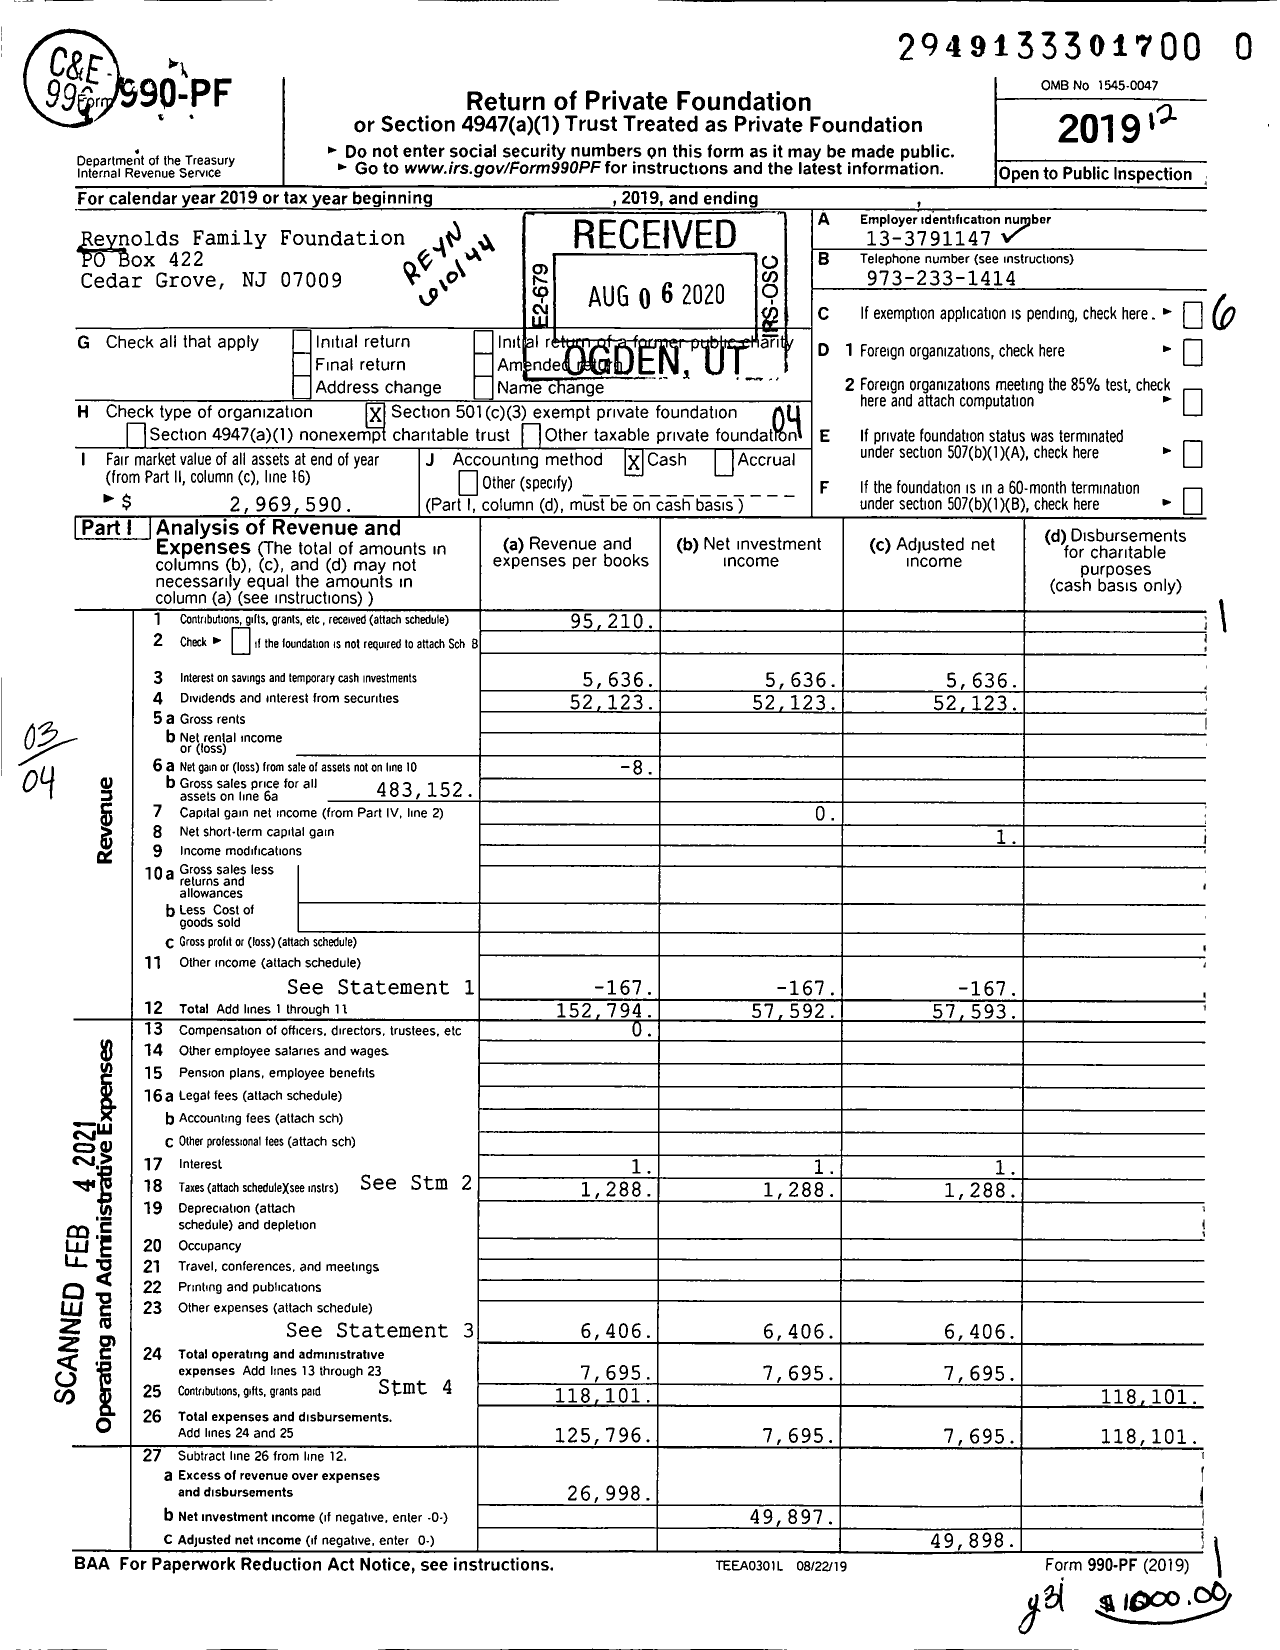 Image of first page of 2019 Form 990PF for Reynolds Family Foundation